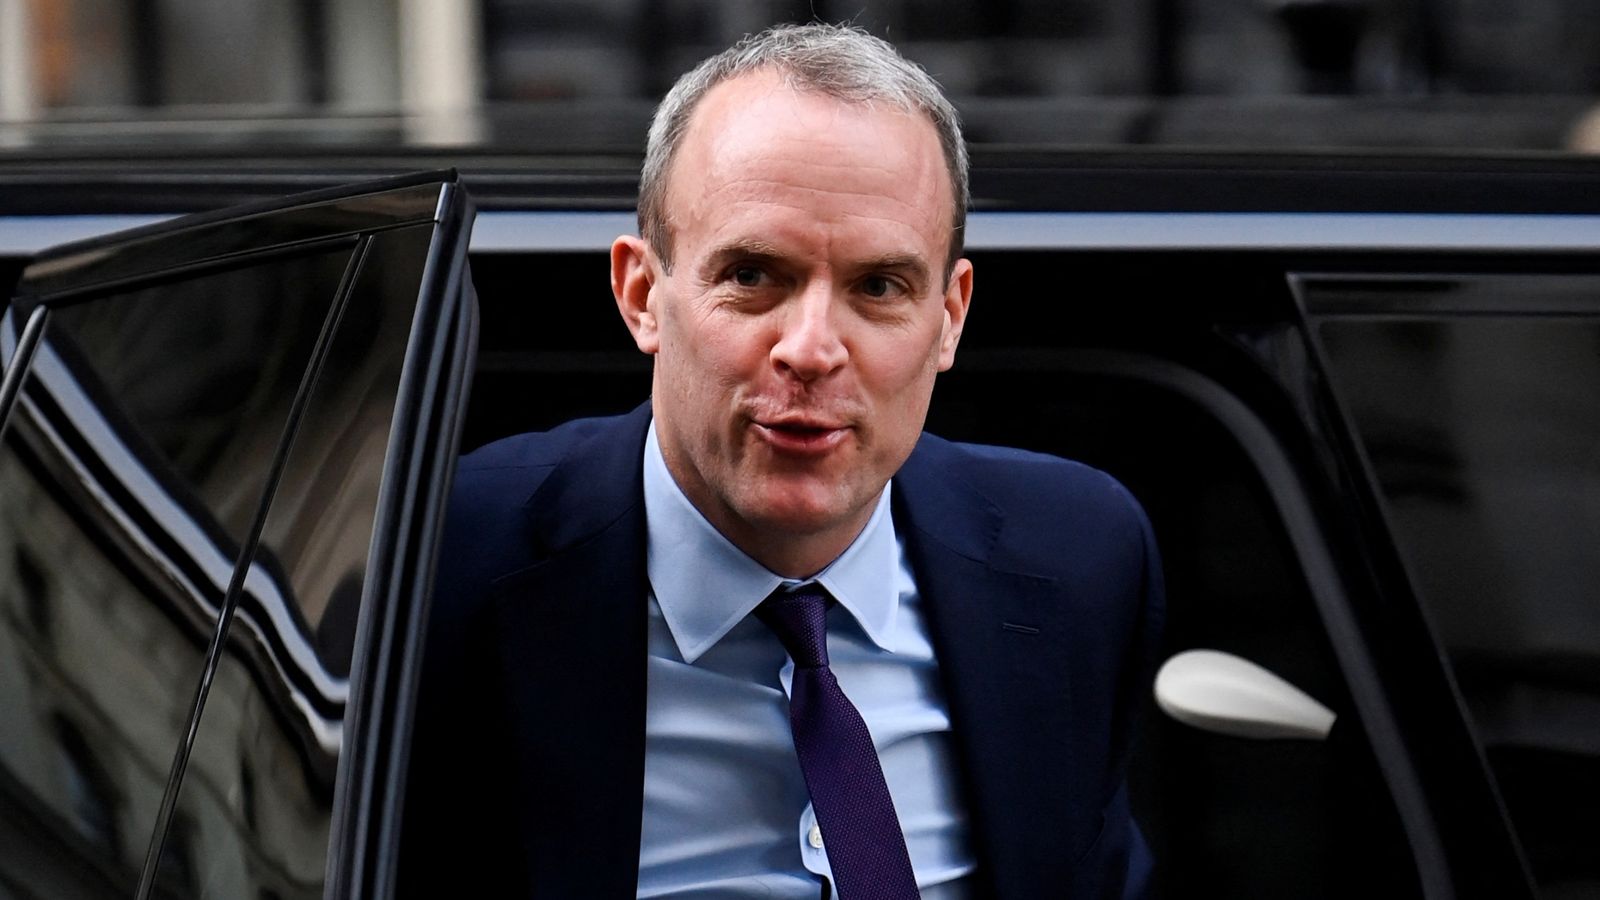 Dominic Raab says he 'behaved professionally at all times' as inquiry into his conduct continues